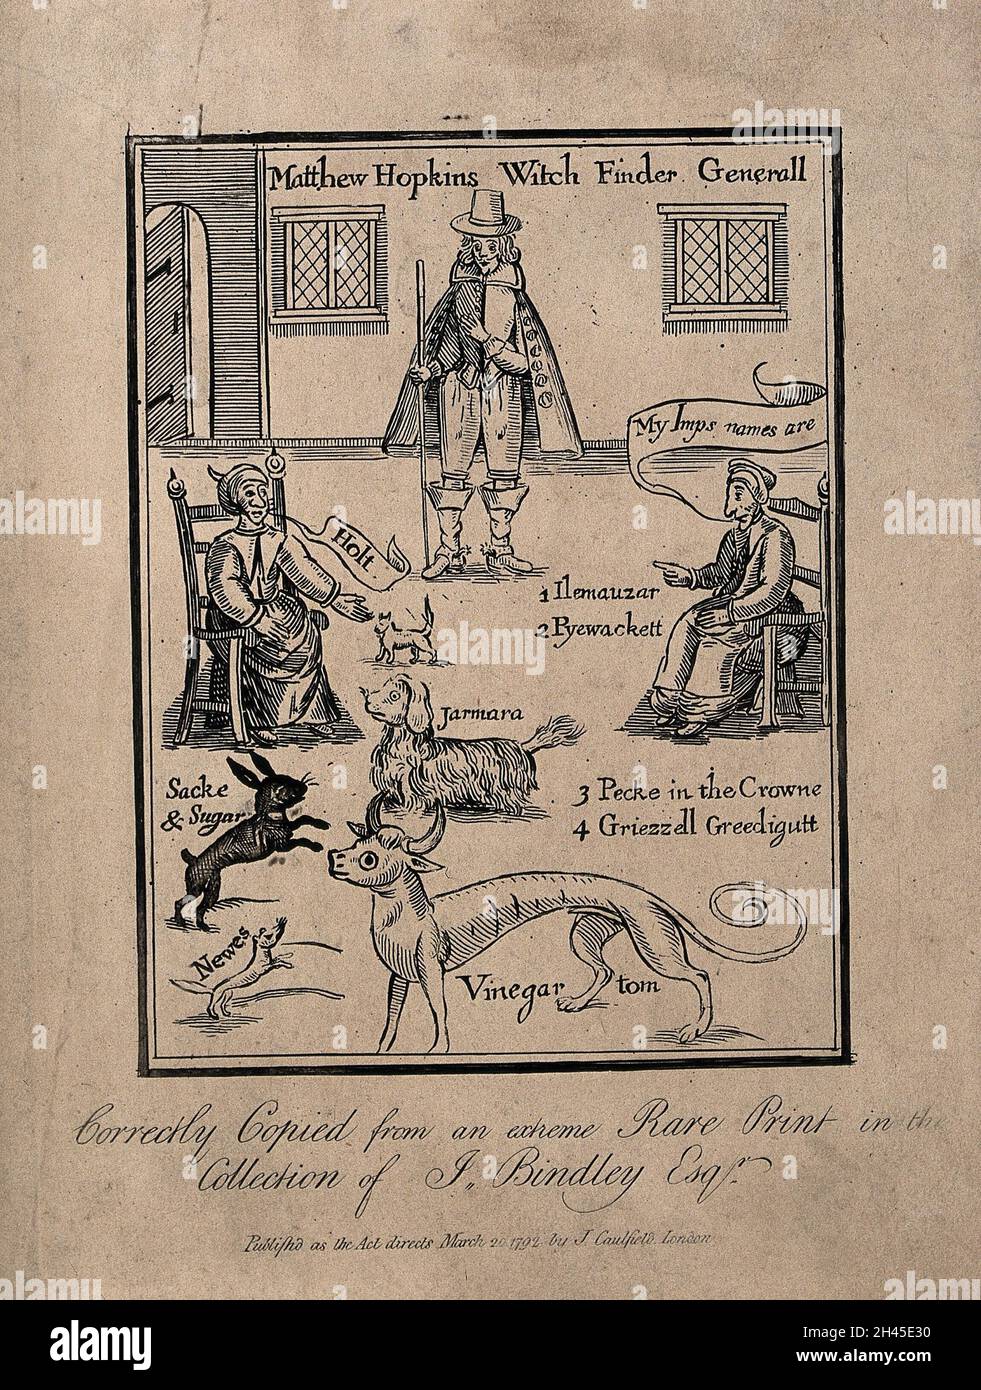 Matthew Hopkins, Witchfinder general, with two supposed witches calling out the names of their demons, some of which are represented by animals. Etching, 1792, after an earlier woodcut. Stock Photo